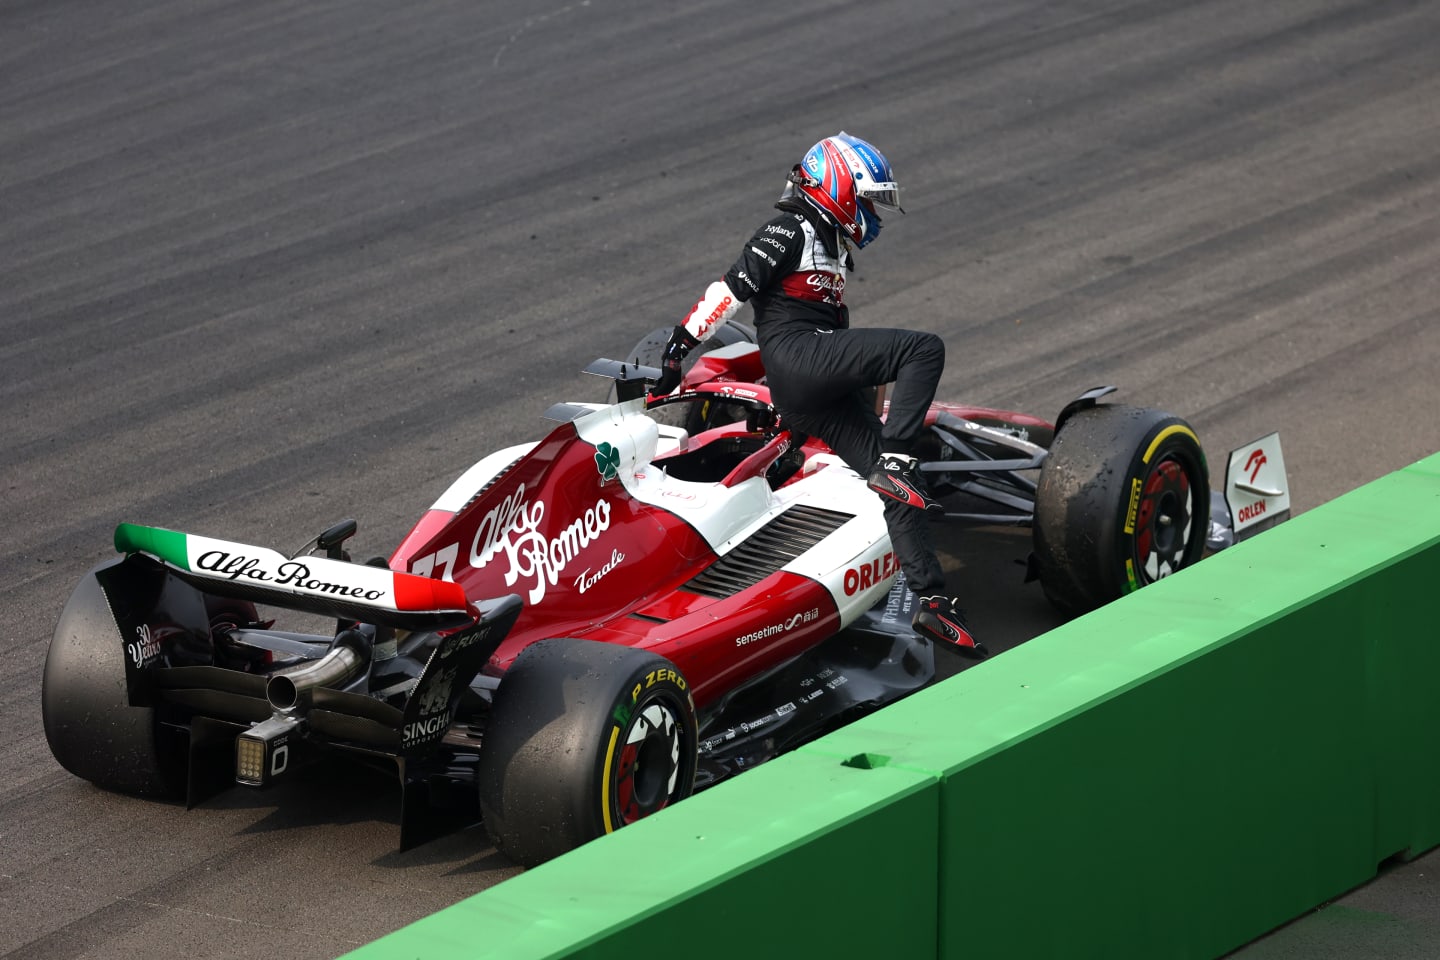 ZANDVOORT, NETHERLANDS - SEPTEMBER 04: Valtteri Bottas of Finland and Alfa Romeo F1 climbs out of their car after stopping on track during the F1 Grand Prix of The Netherlands at Circuit Zandvoort on September 04, 2022 in Zandvoort, Netherlands. (Photo by Lars Baron - Formula 1/Formula 1 via Getty Images)